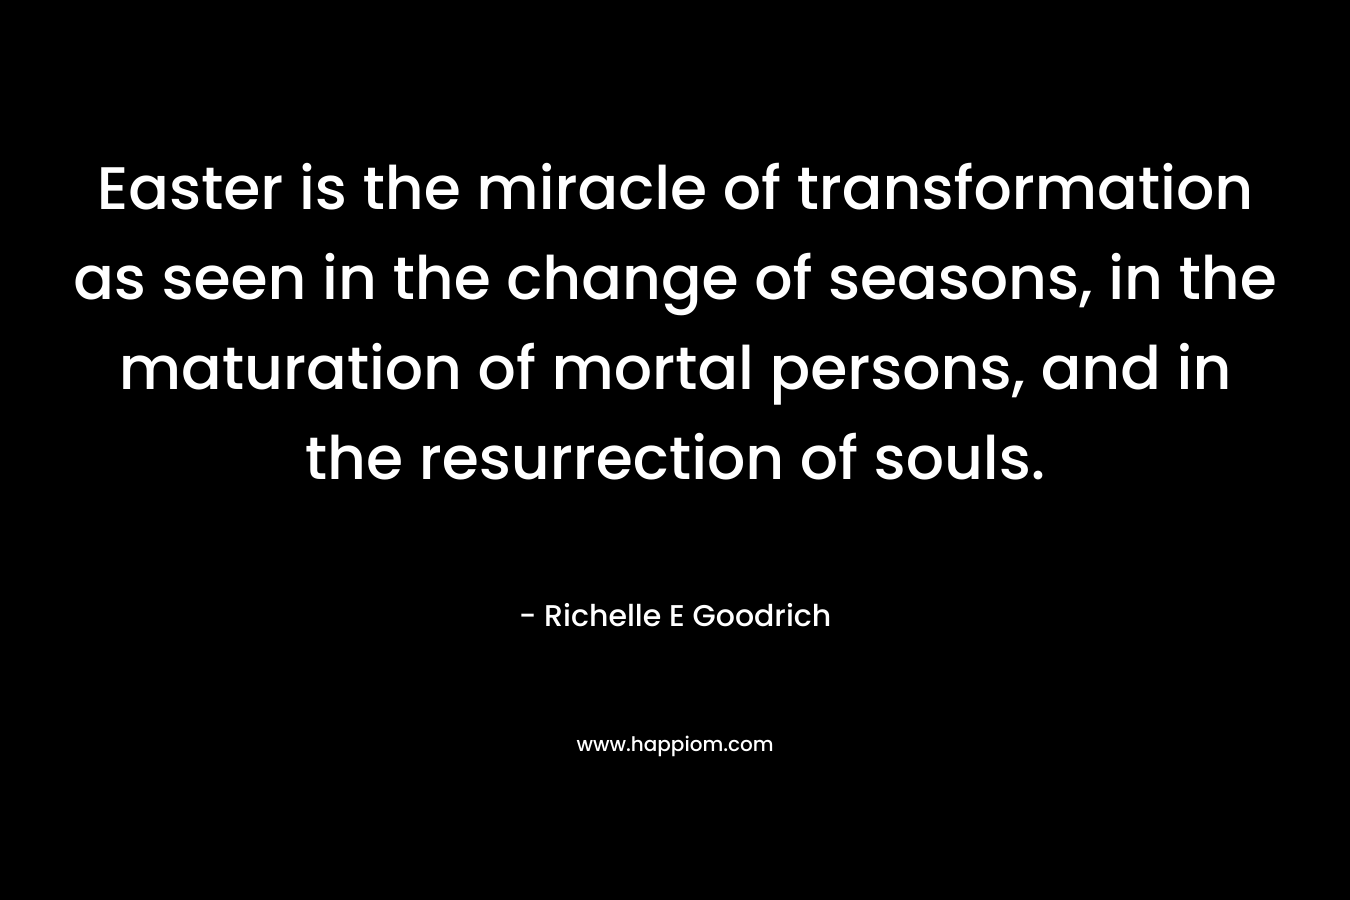 Easter is the miracle of transformation as seen in the change of seasons, in the maturation of mortal persons, and in the resurrection of souls. – Richelle E Goodrich